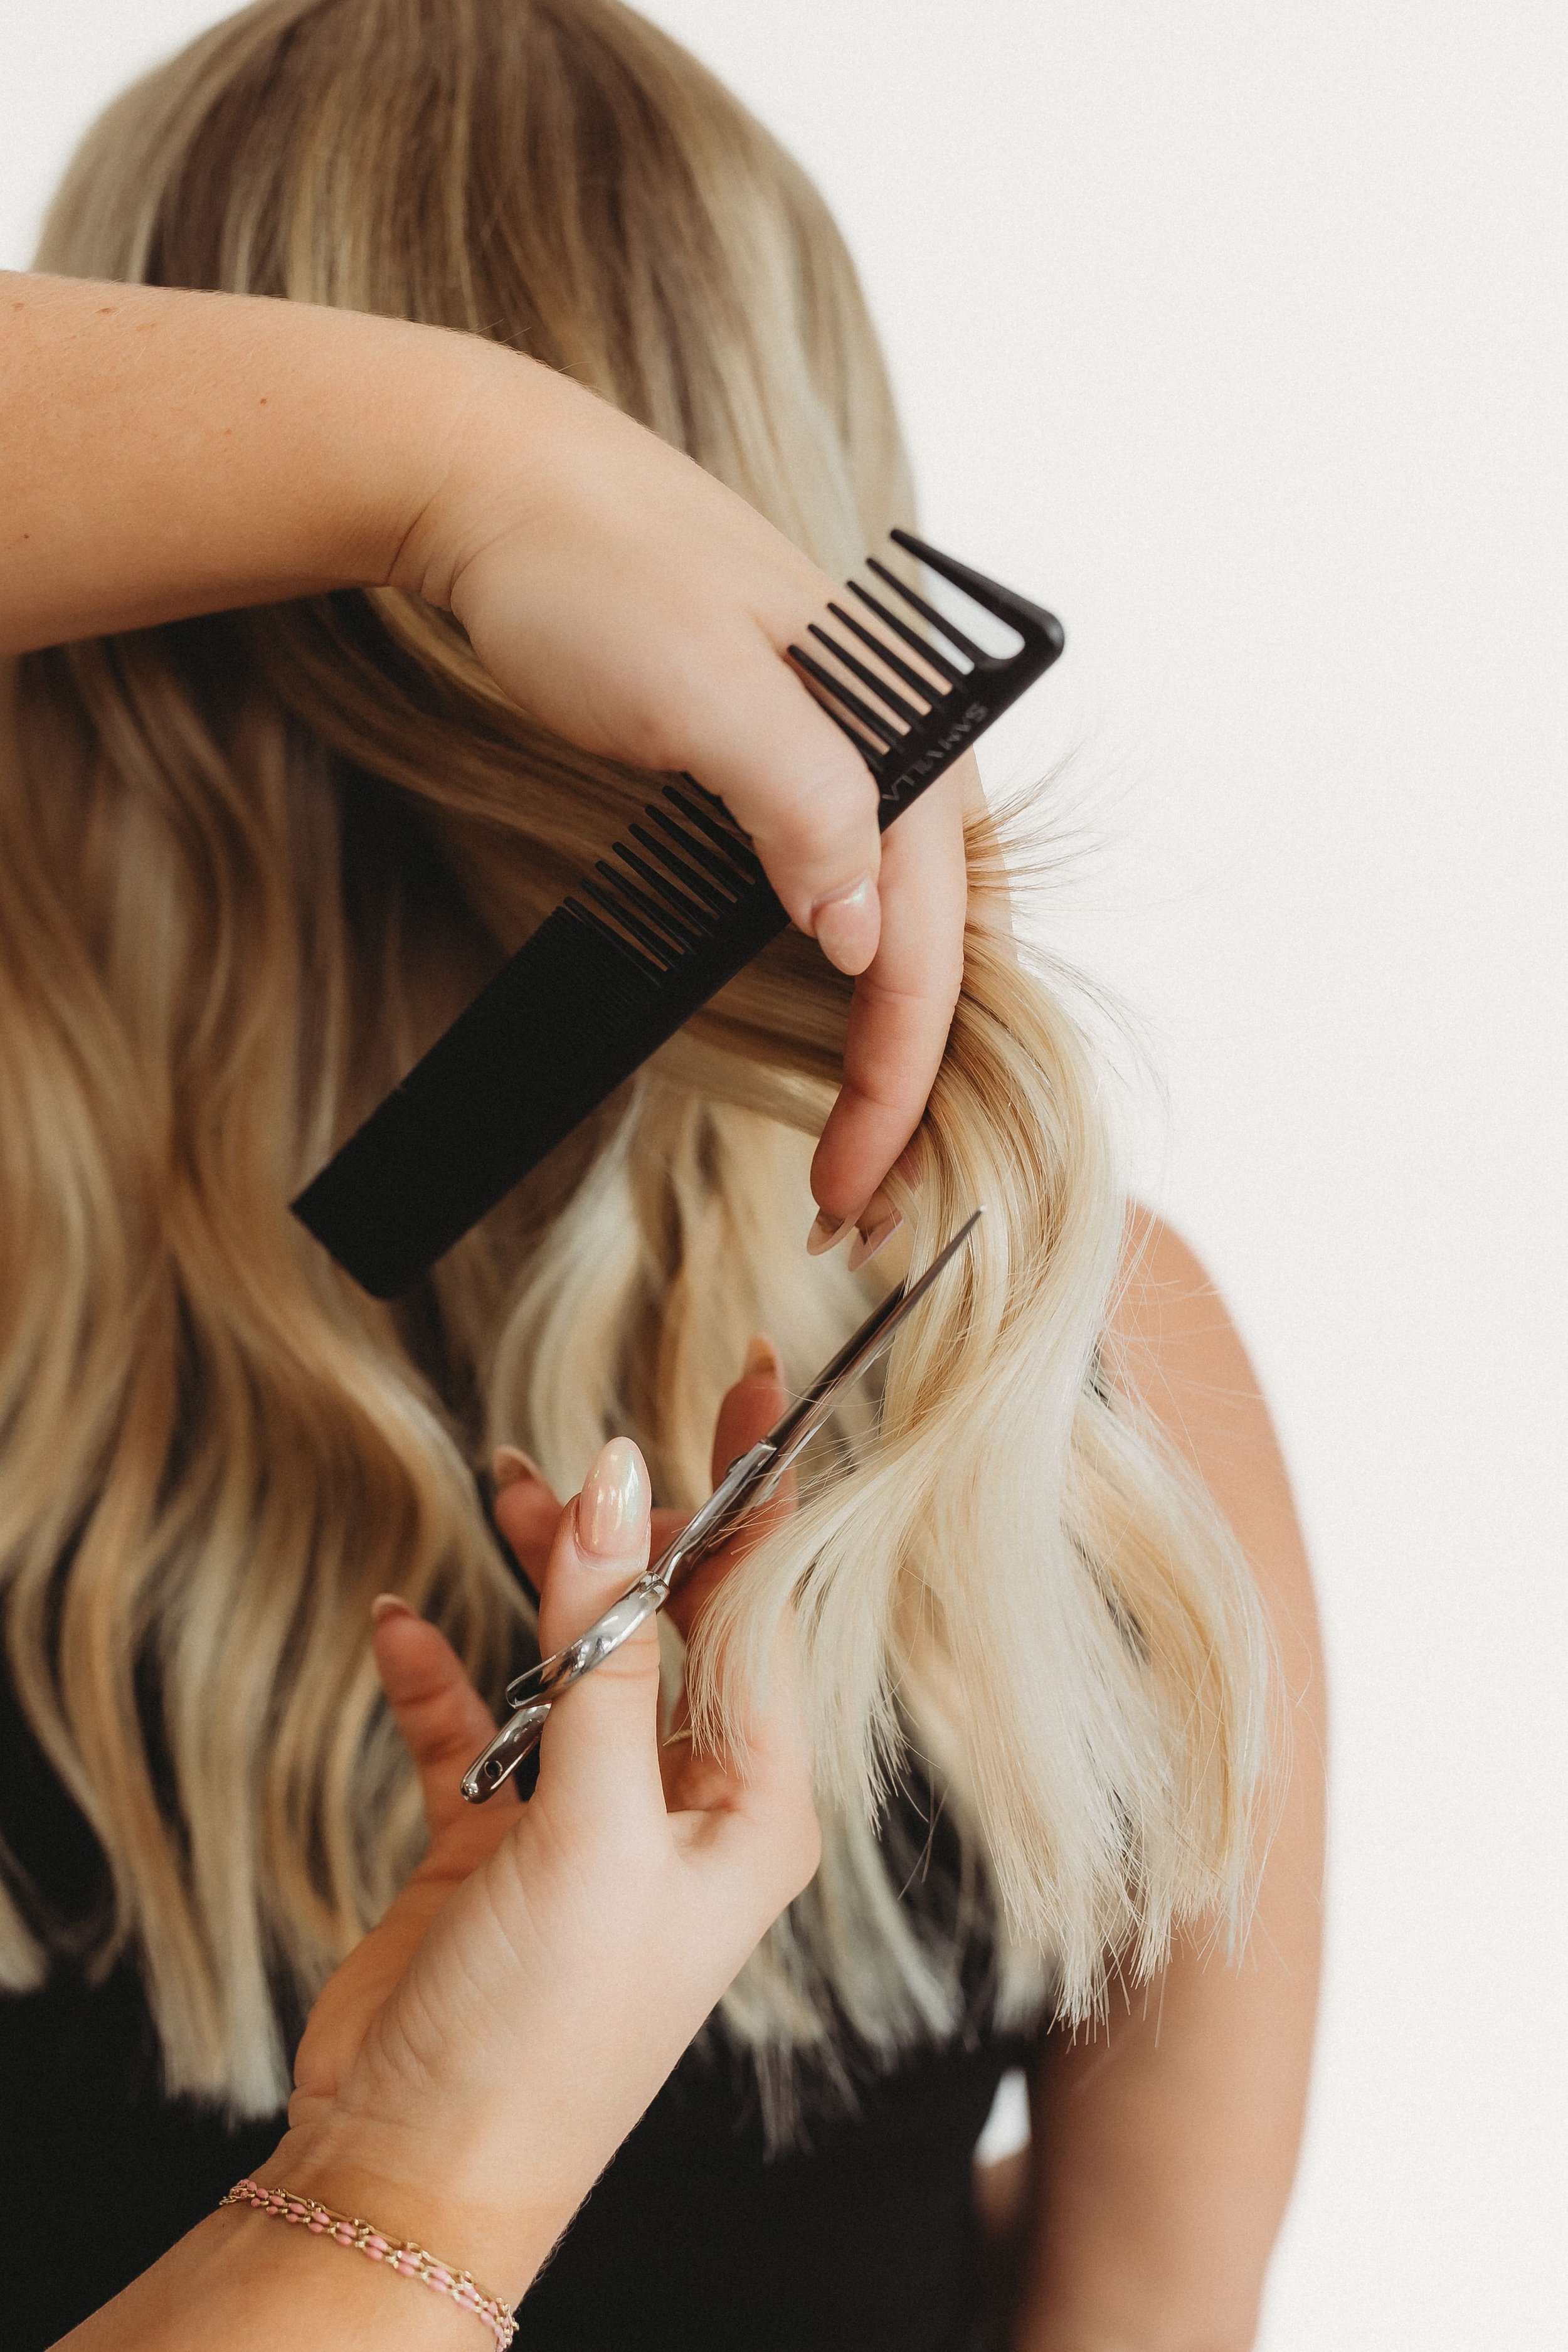  during a stylist photoshoot, a pair of hands hold a comb ands sheers to a woman’s head of hair 